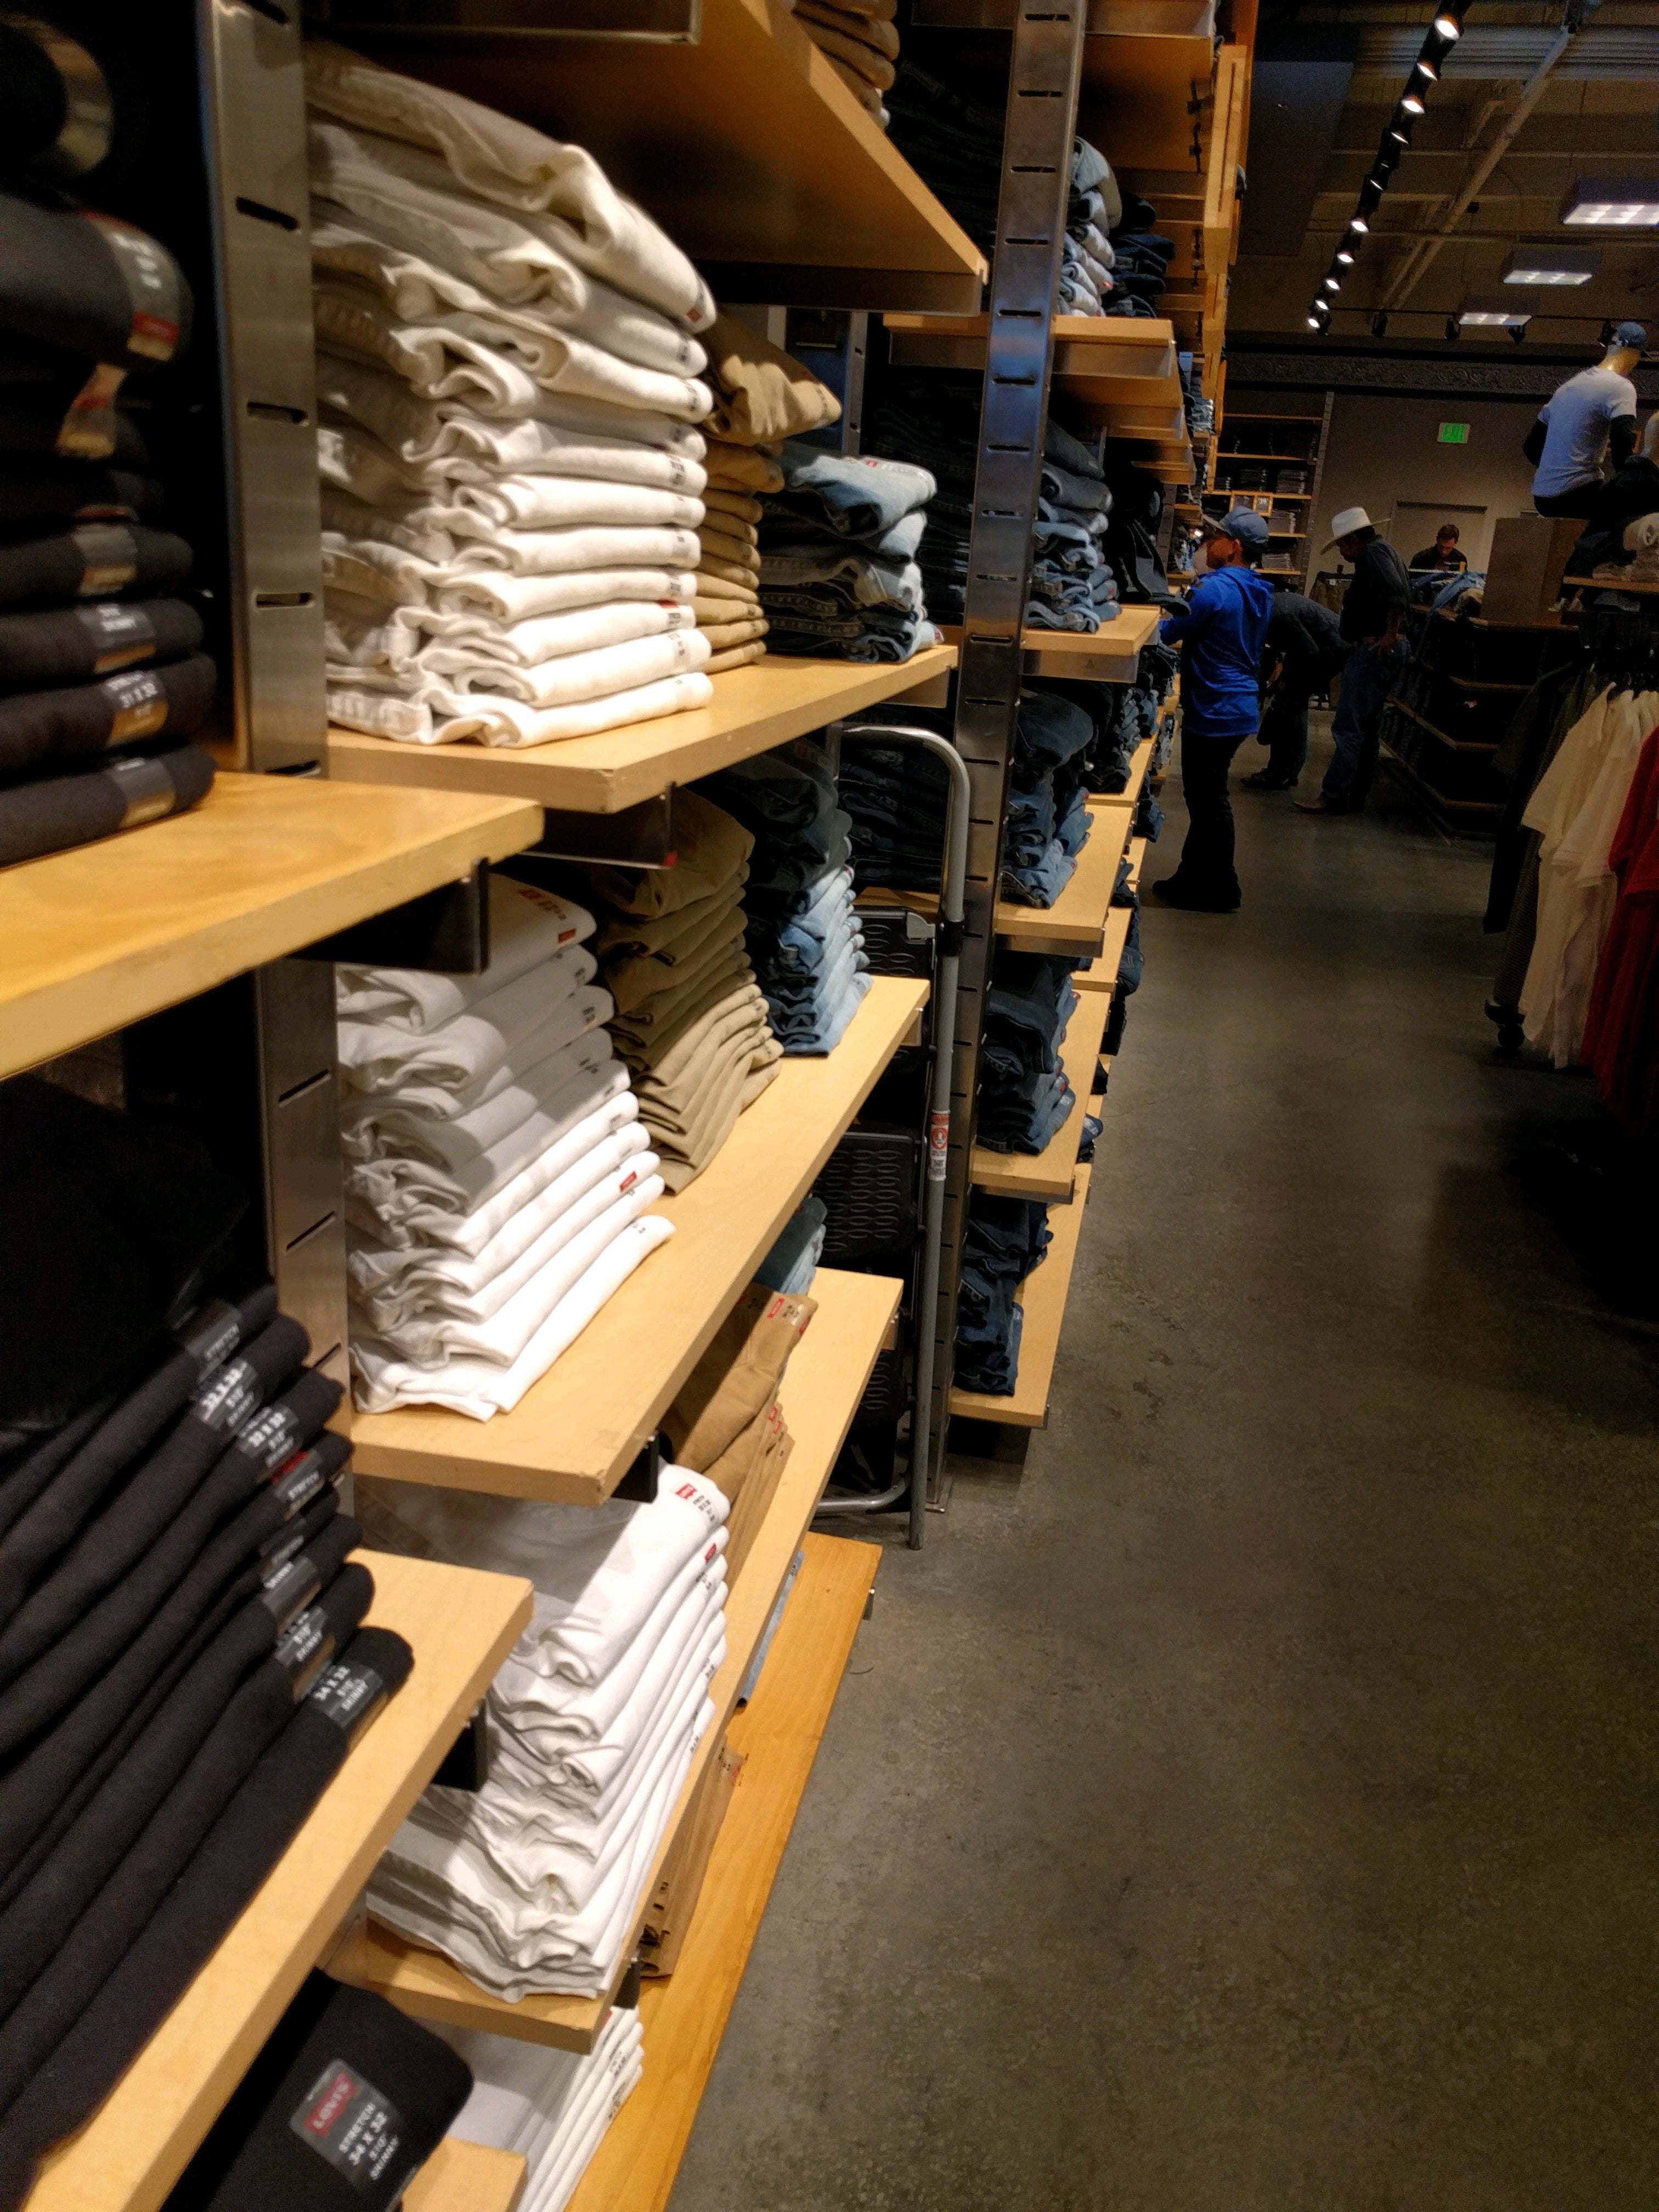 Levi's Outlet Store, 8375 Arroyo Cir, Ste 50, Gilroy, CA, Clothing Retail -  MapQuest